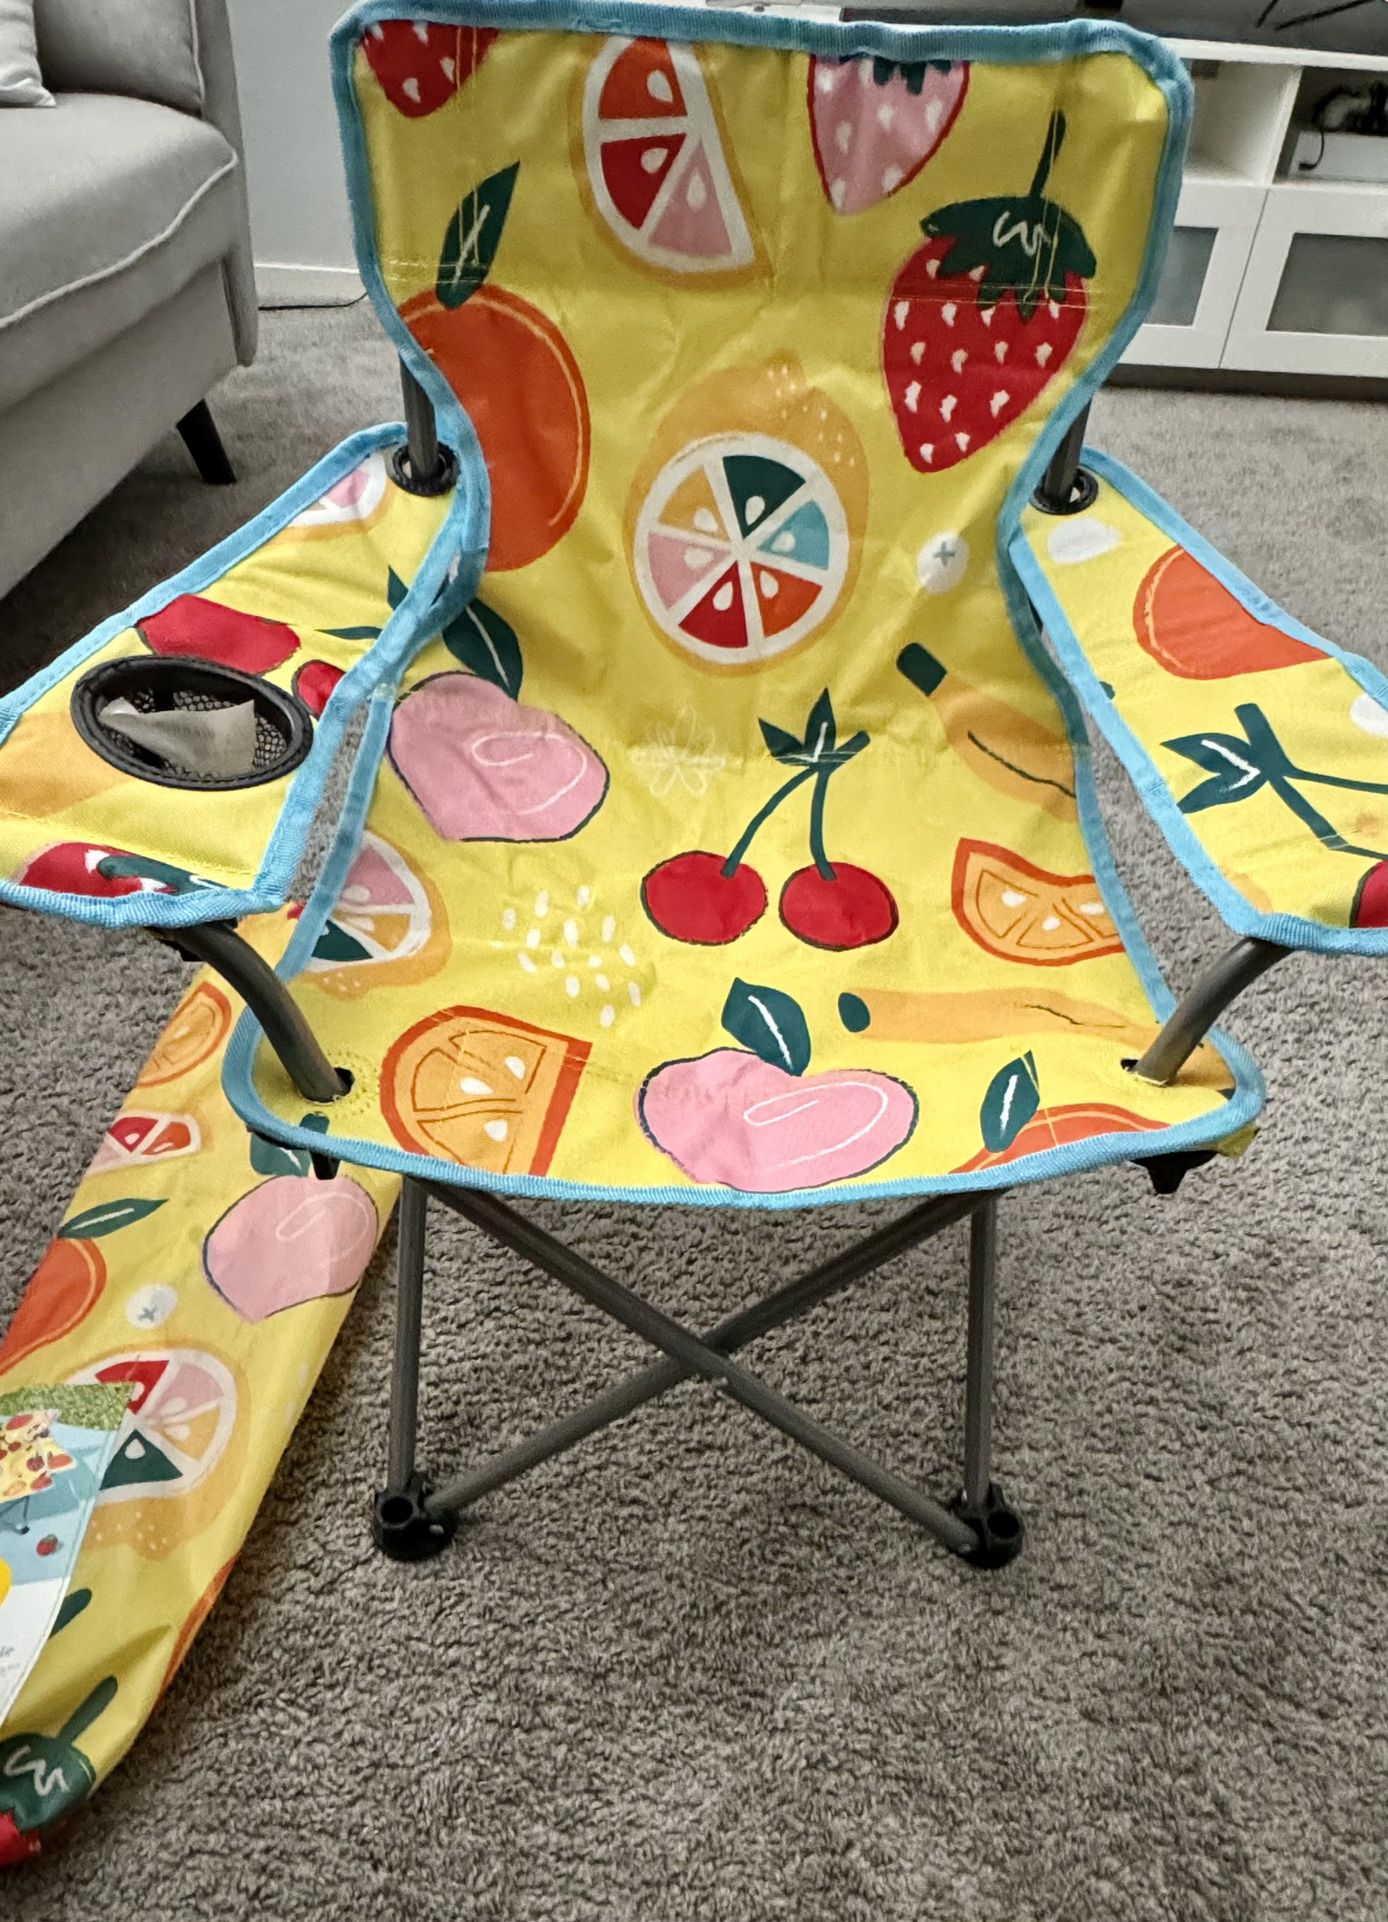 Kids Portable Folding Chair With Cup Holder And Carrying Bag. New Condition. Feel Free To Message Me Anytime!